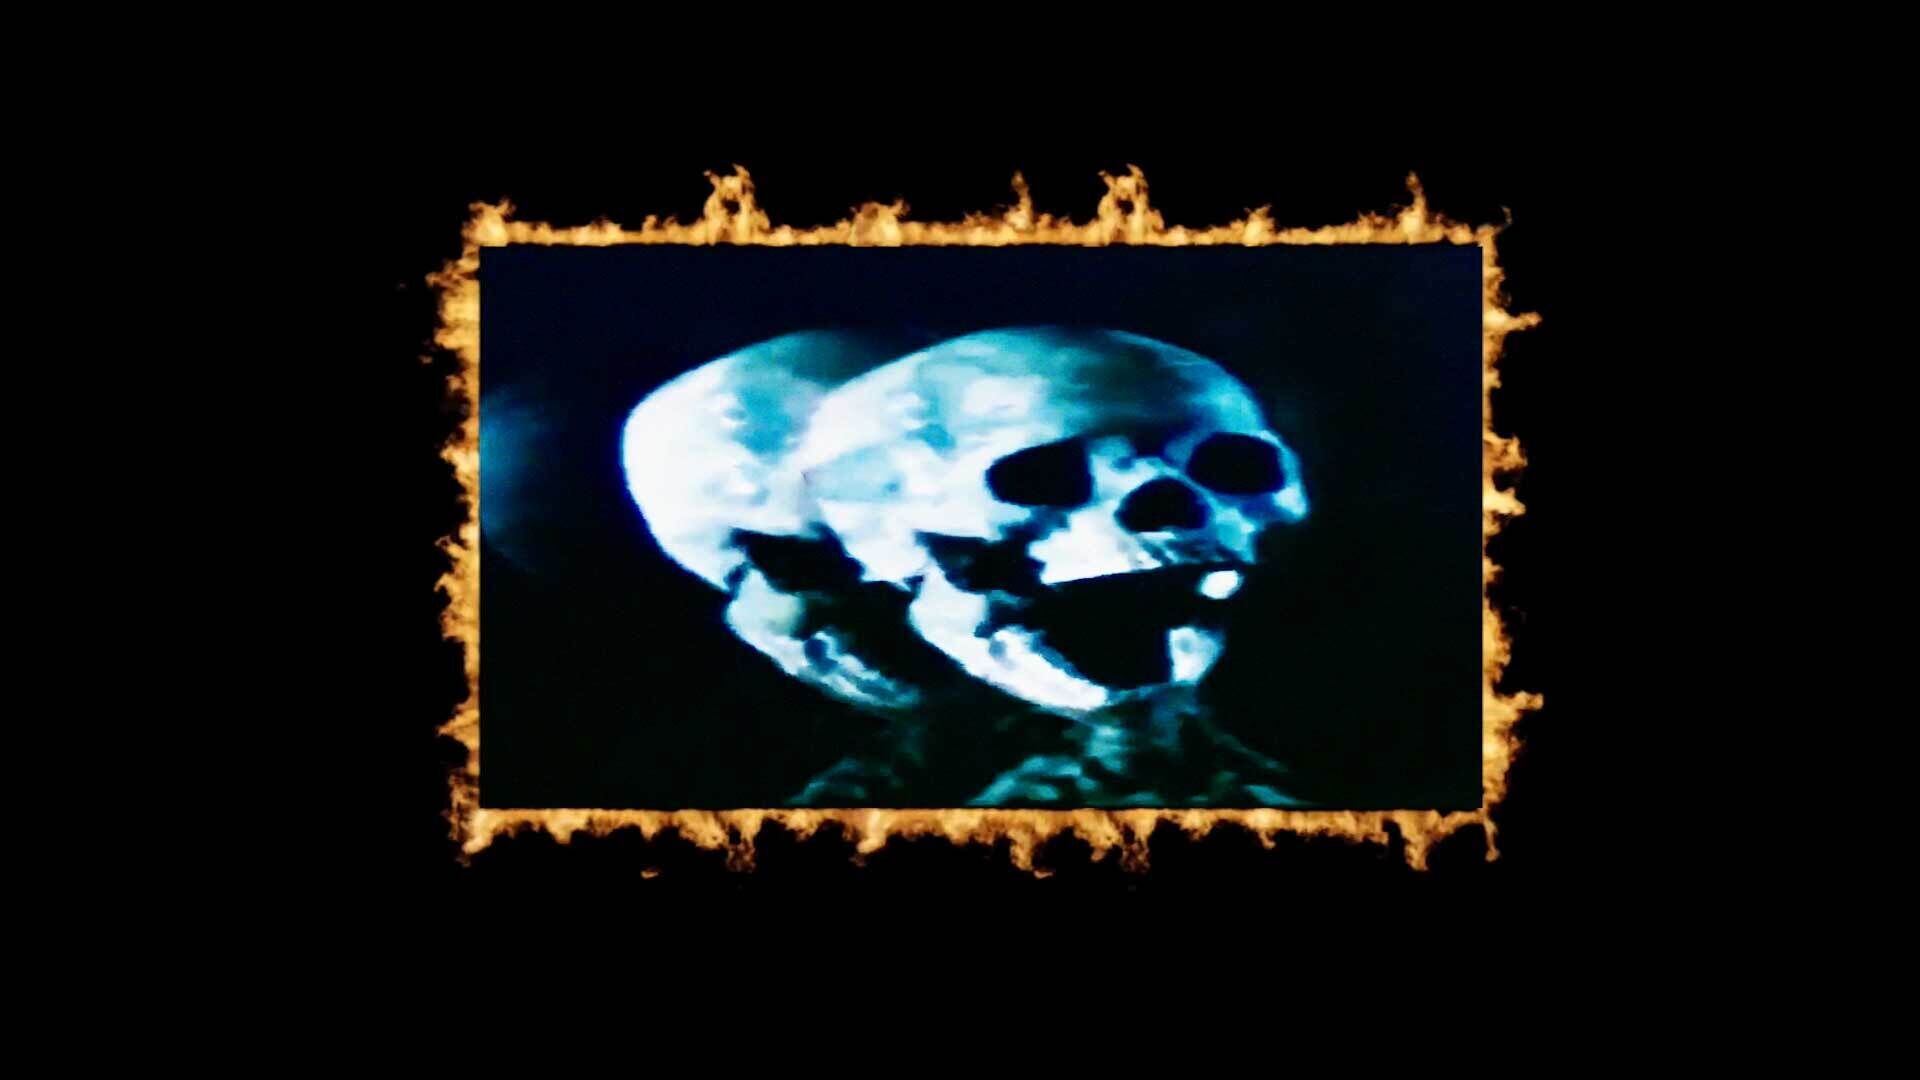 A glowing blue skull against a black background with a burnt edge effect.